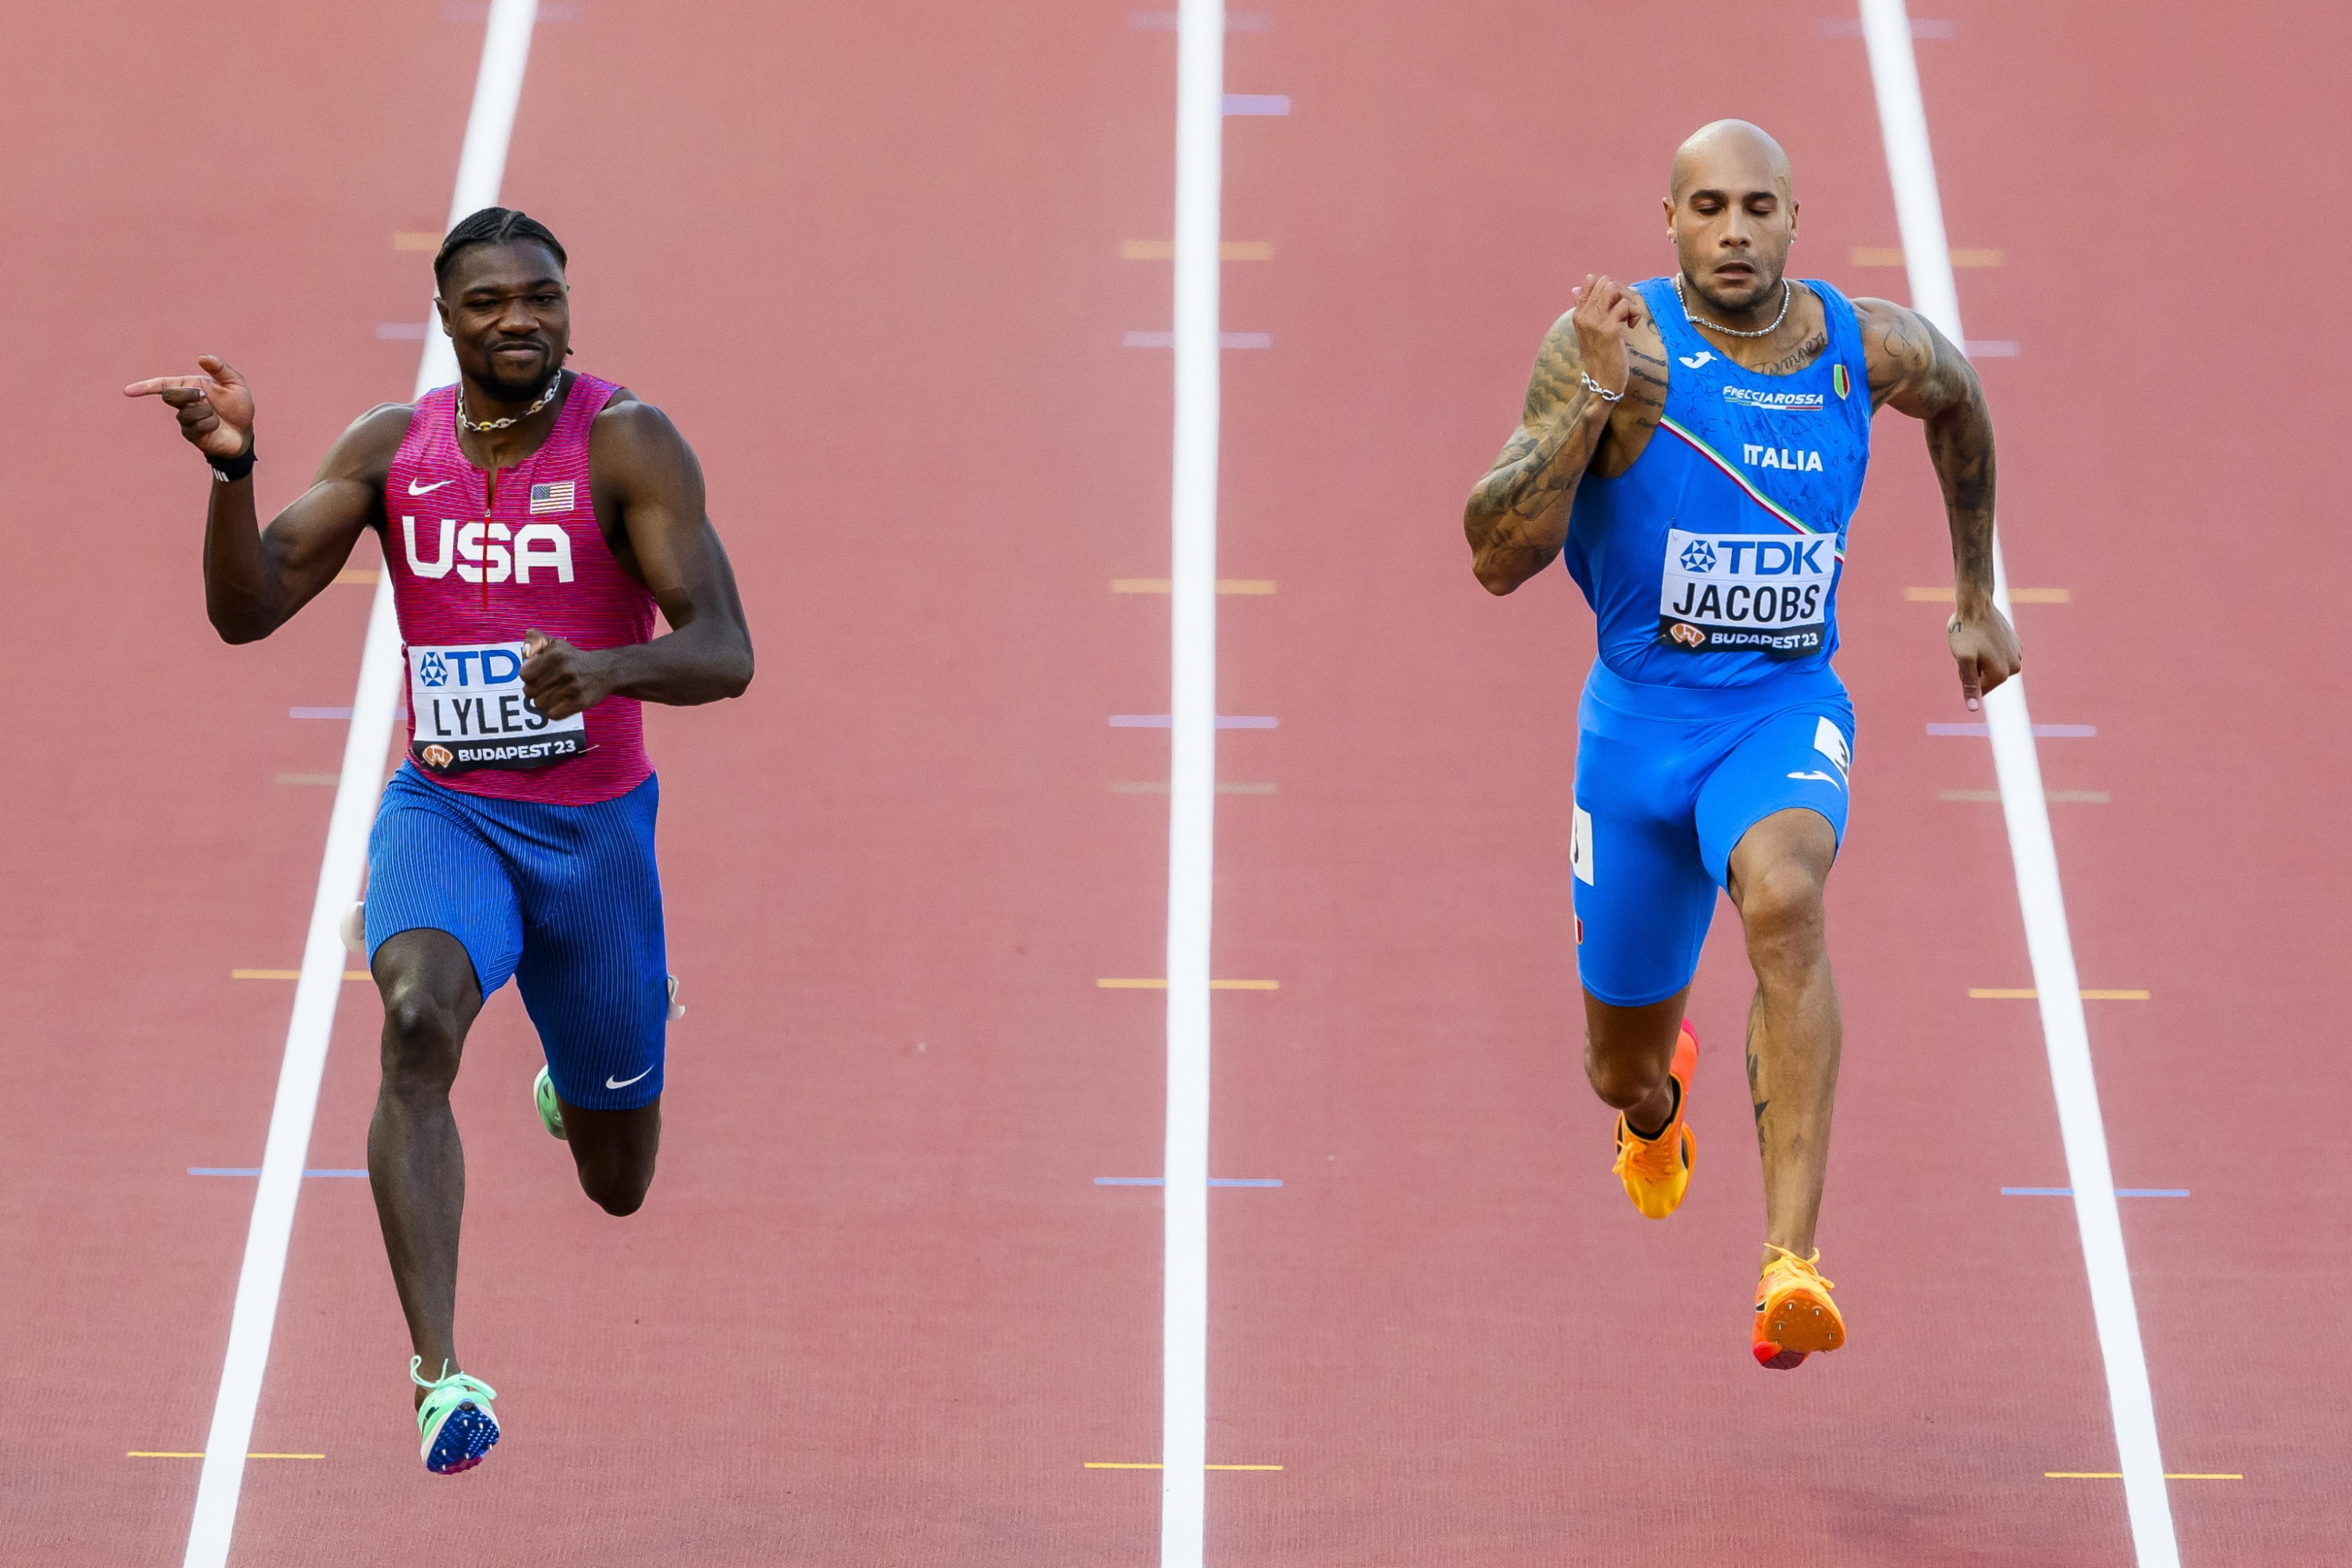 epa10810038 Noah Lyles (L) of the USA in action next to Lamont Marcell Jacobs of Italy during the men's 100 meters semi-final of the World Athletics Championships in Budapest, Hungary, 20 August 2023.  EPA/JEAN-CHRISTOPHE BOTT